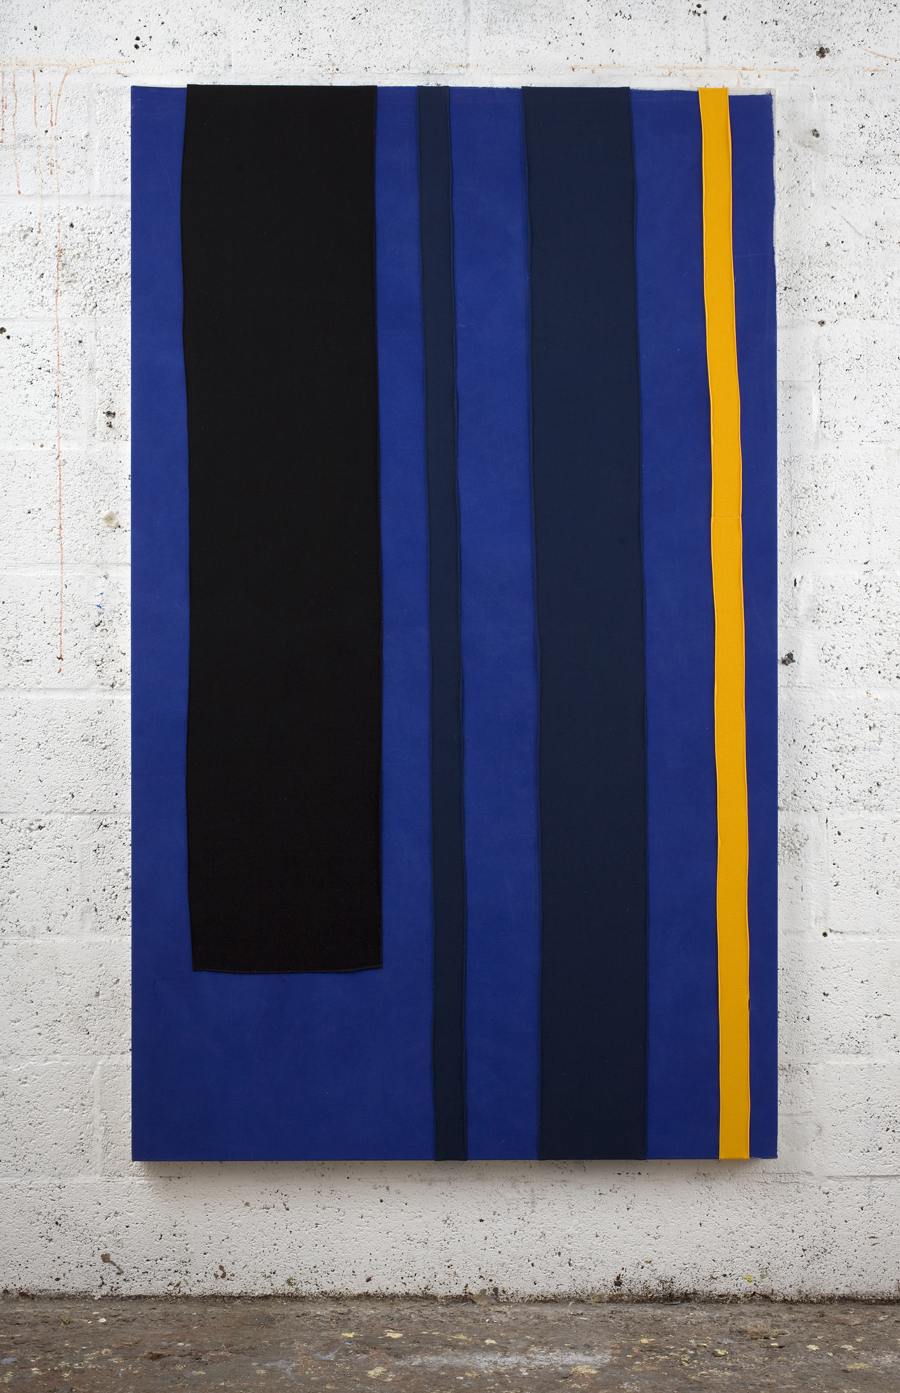 Dillwyn Smith - Material Things - Blue, Yellow, canvas, pre-dyed canvas, acrylic, 200 x 120 cm, 2012